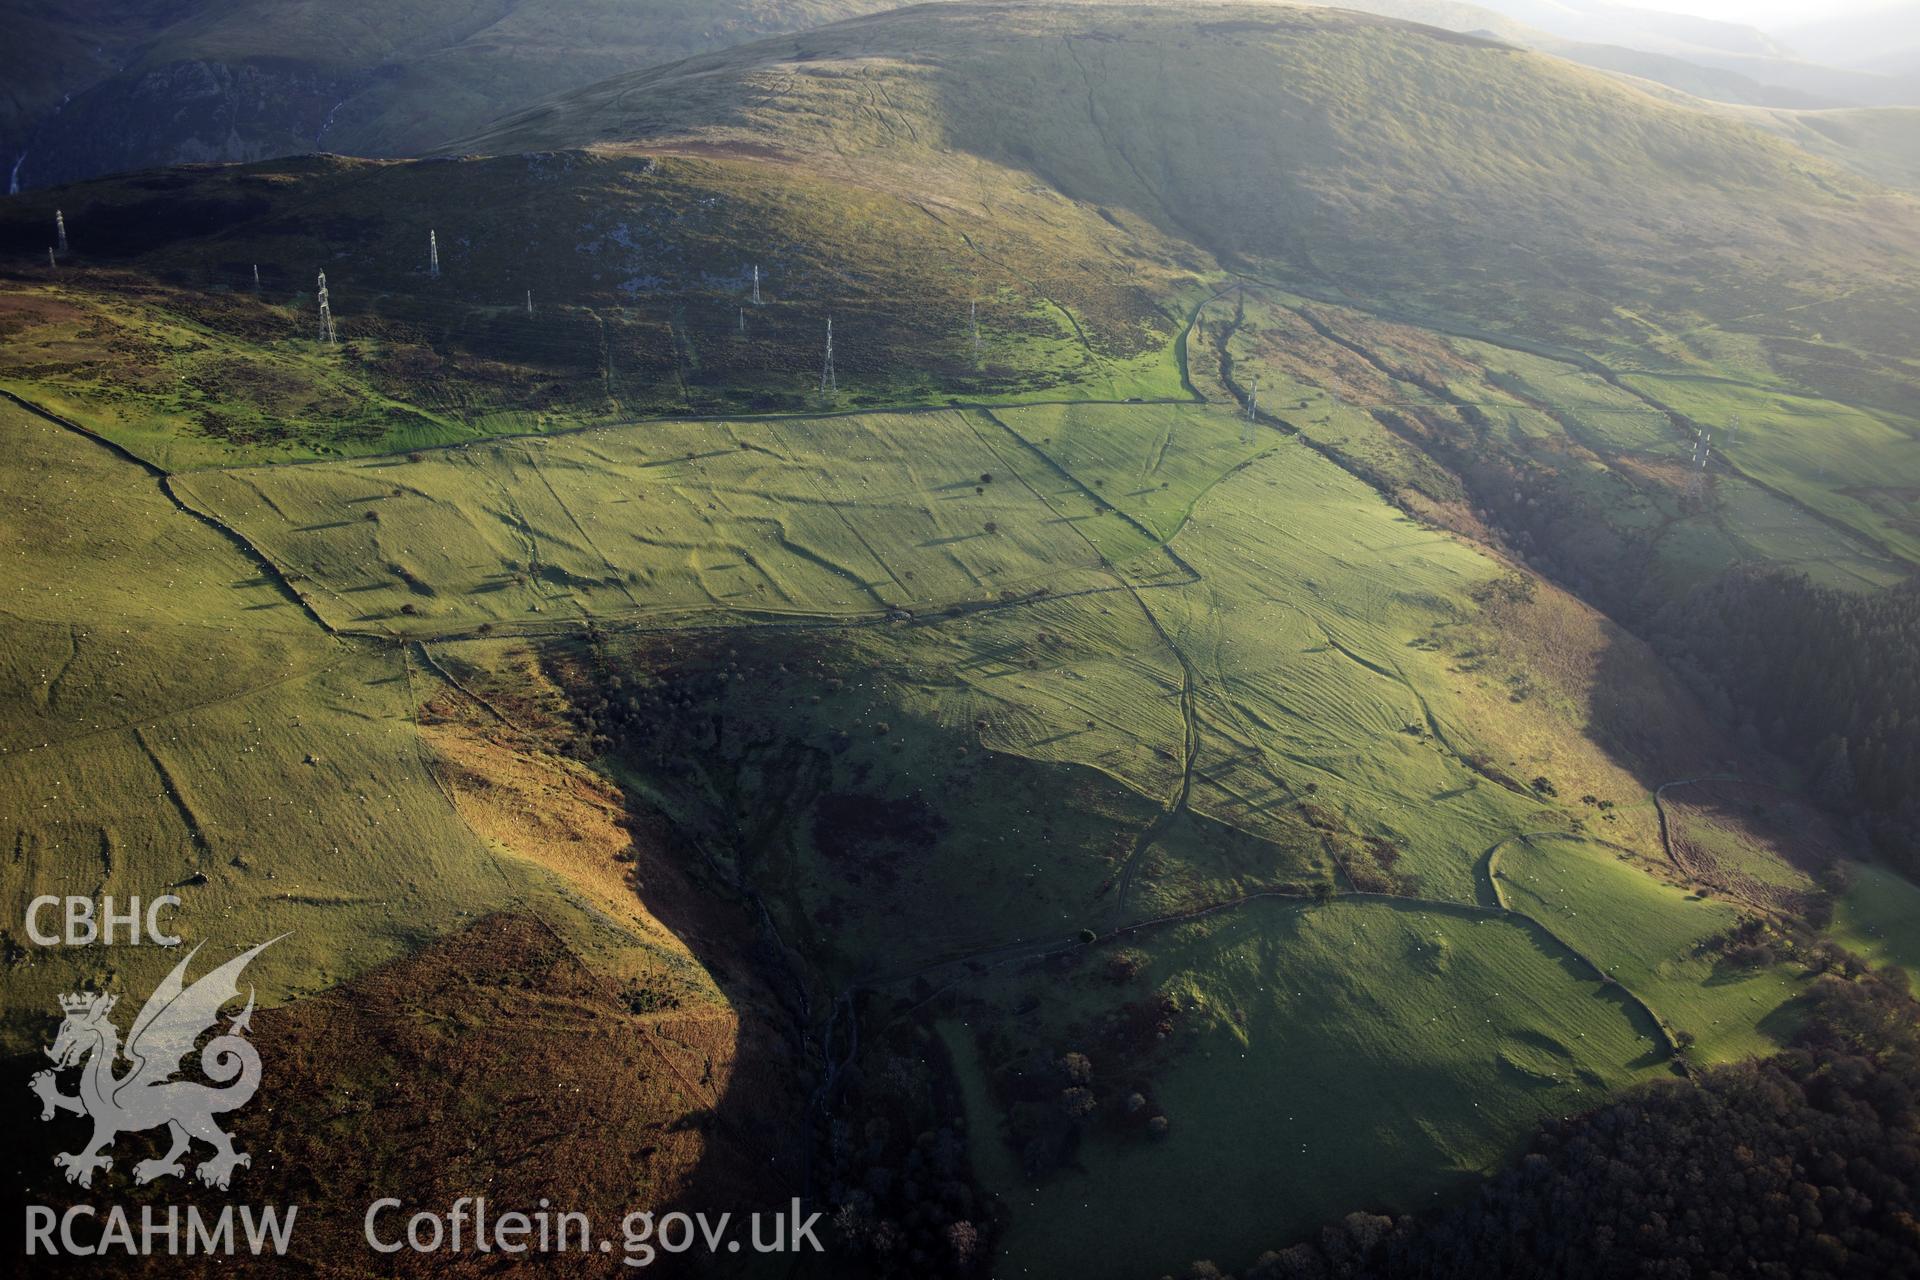 RCAHMW colour oblique photograph of Ffridd Ddu field system, and landscape. Taken by Toby Driver on 10/12/2012.